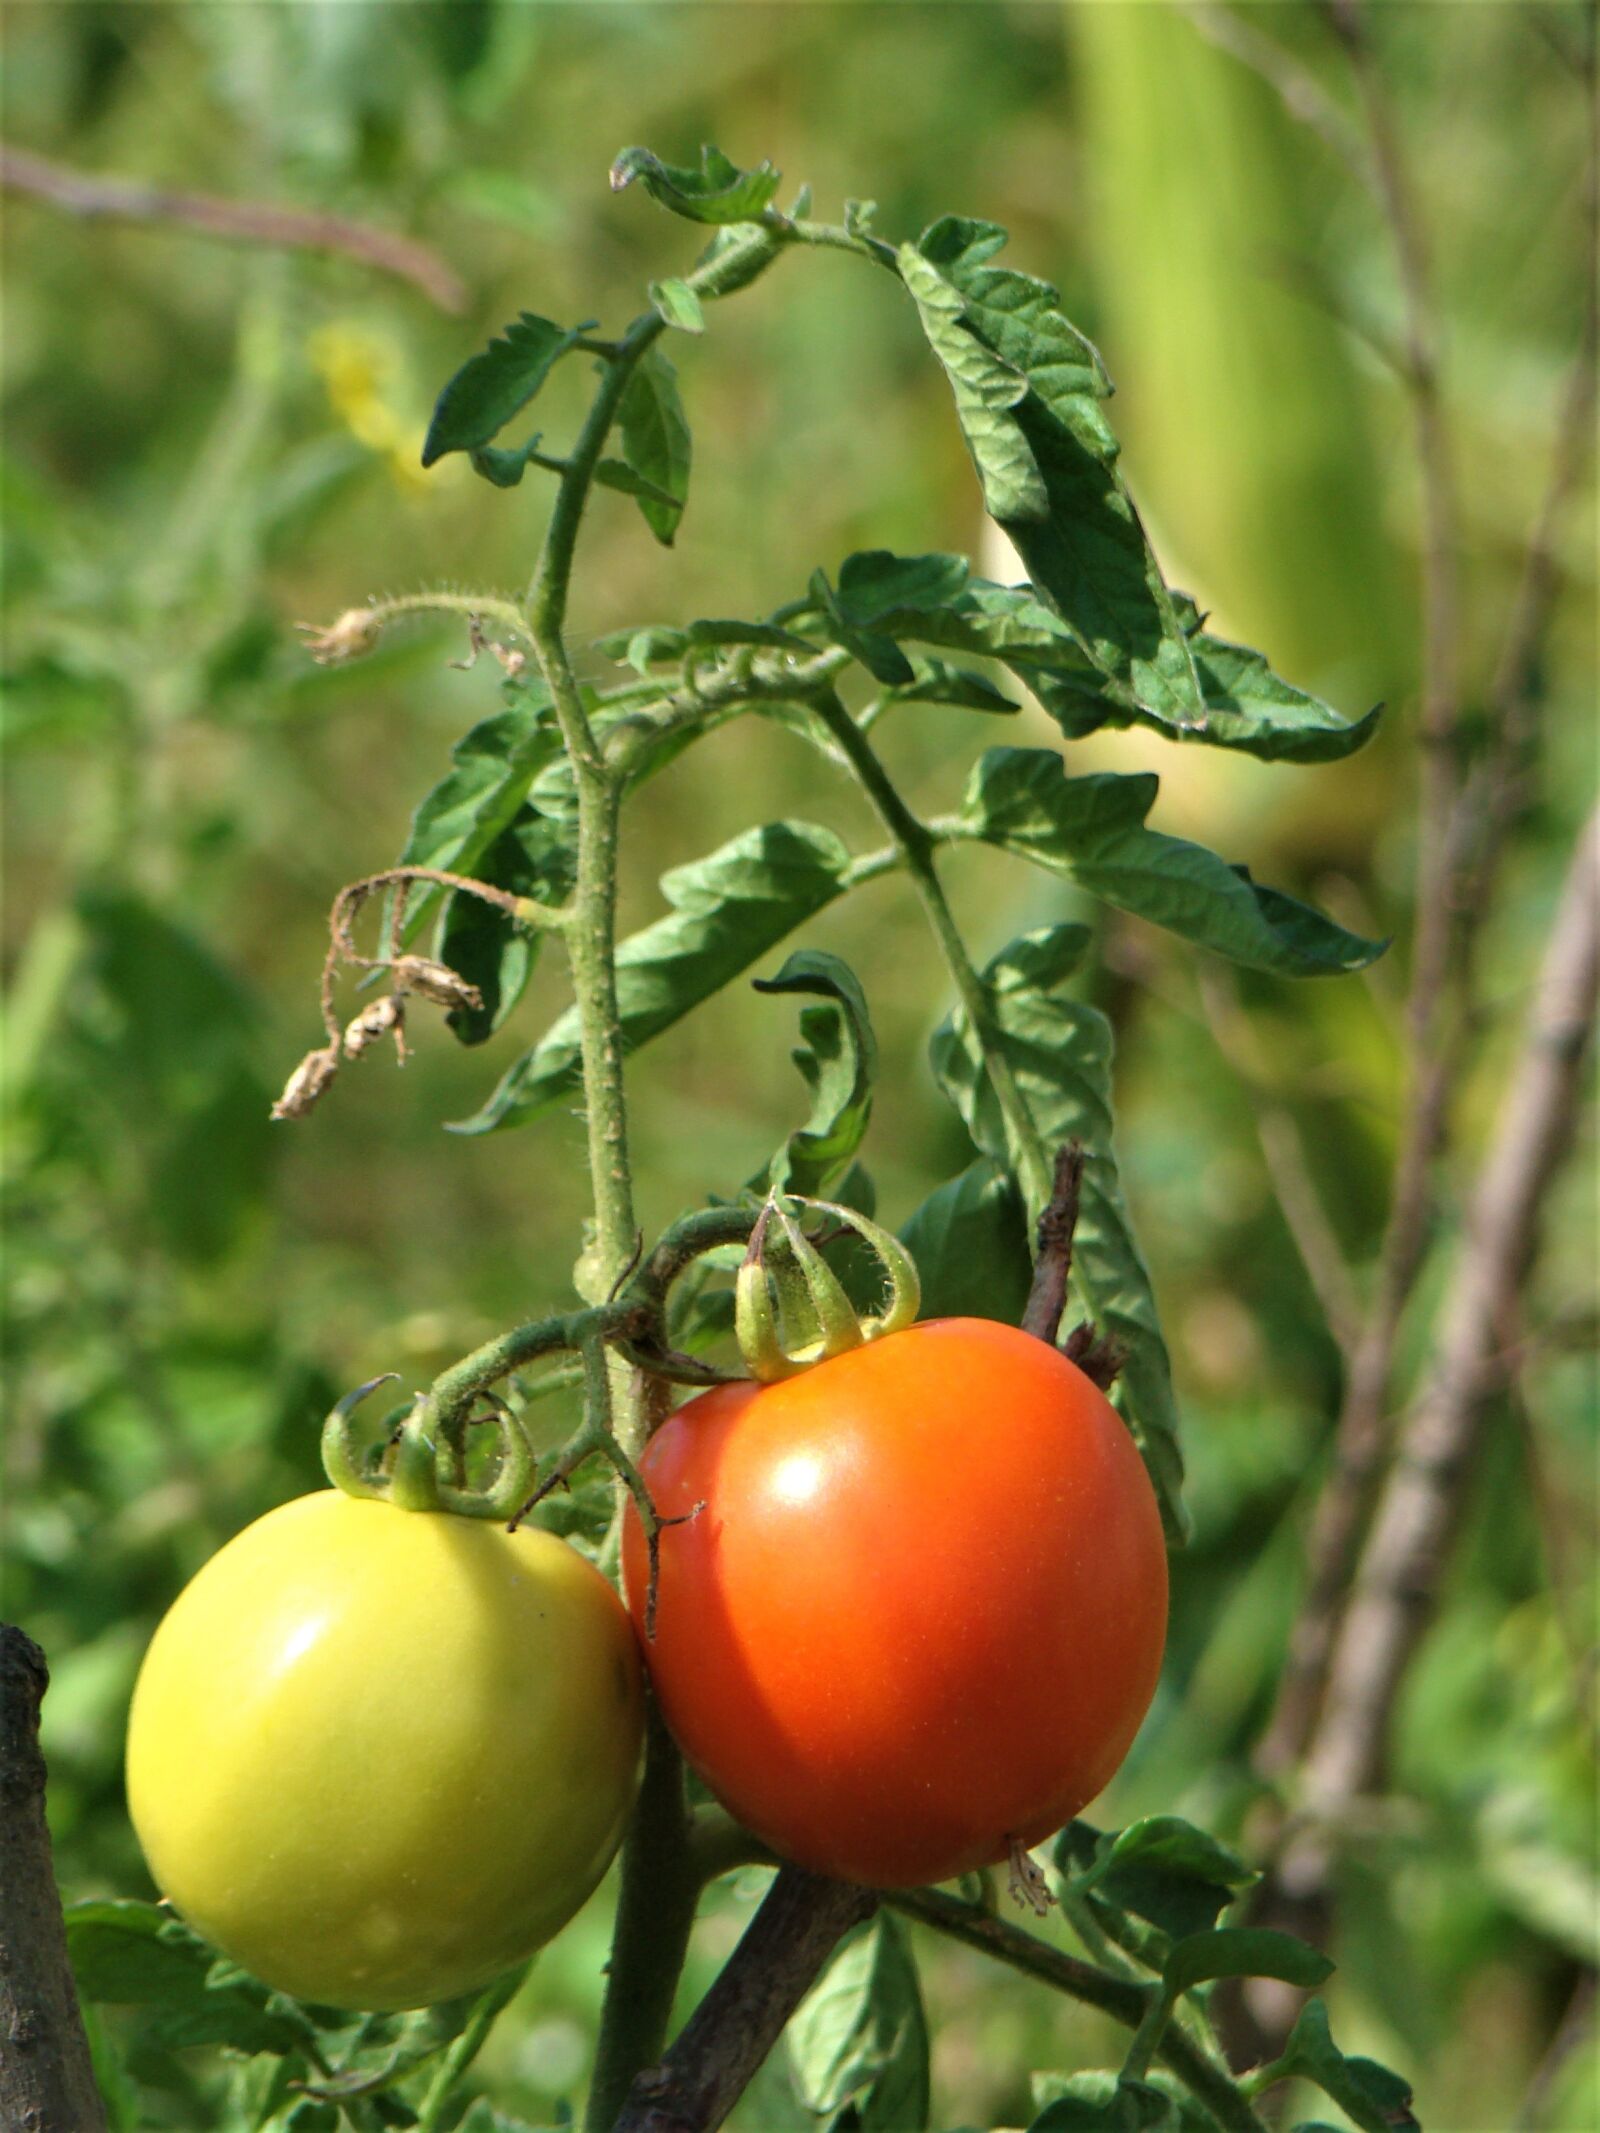 Sony DSC-H9 sample photo. Tomato, nature, red photography